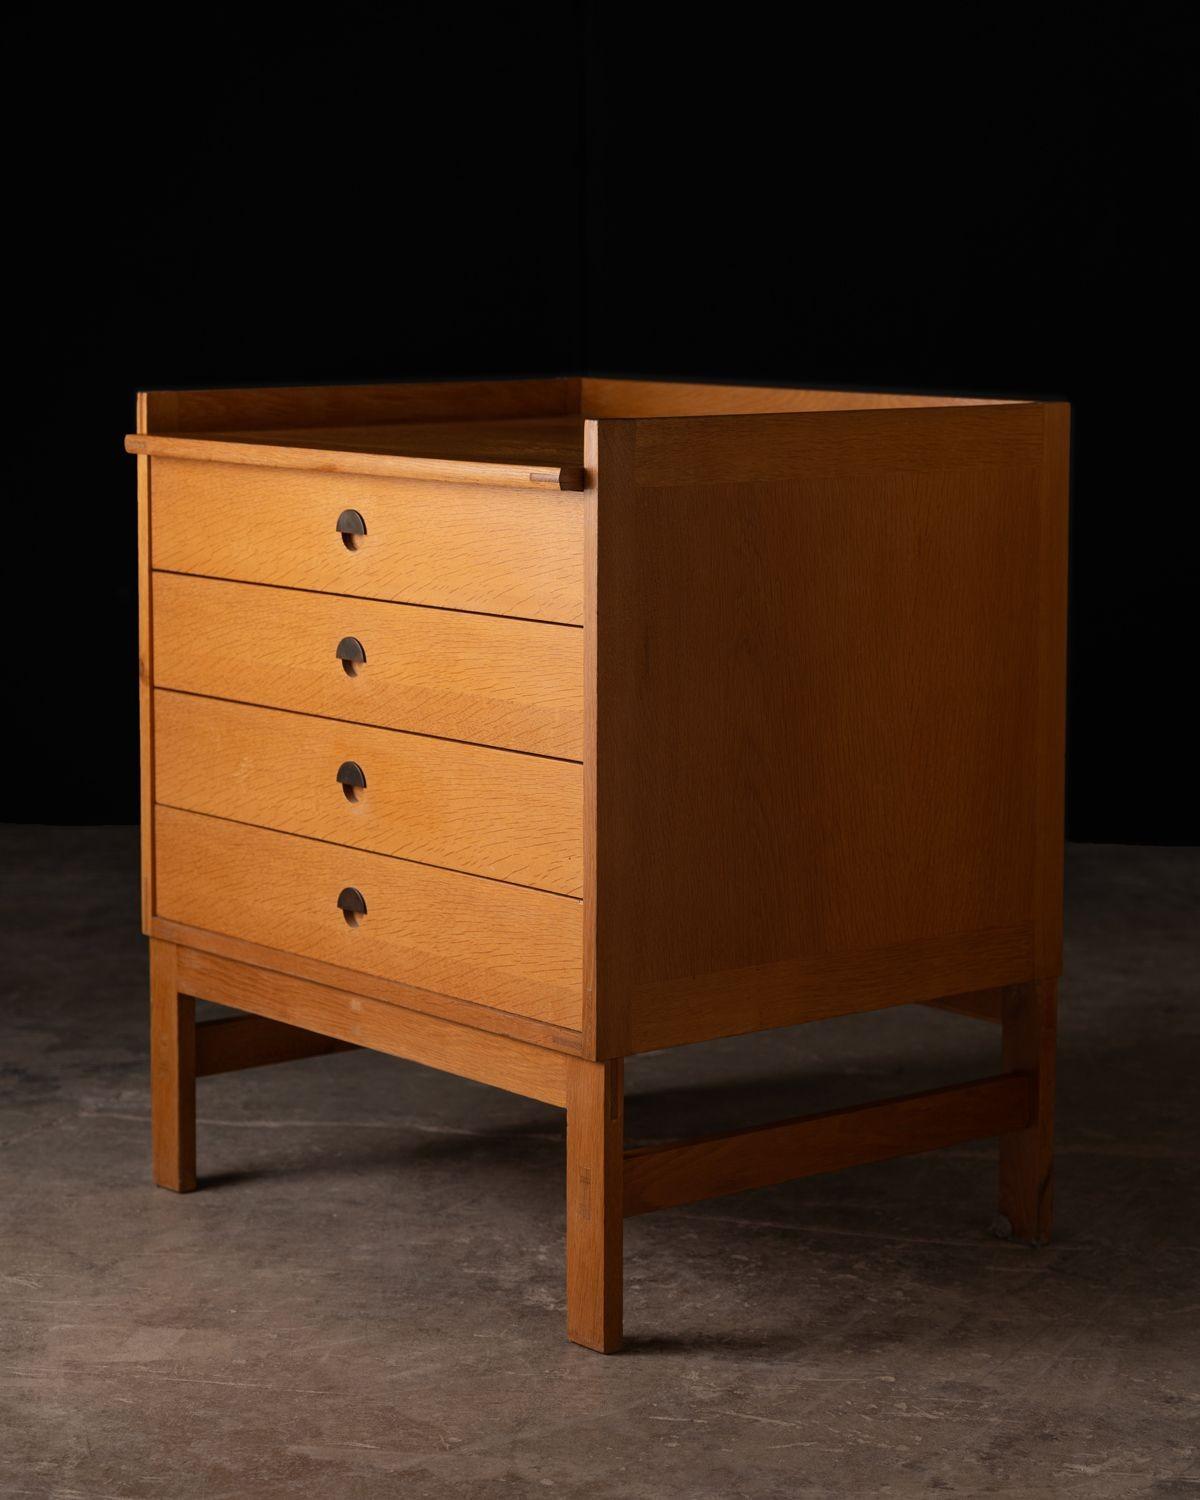 This rare Danish modern cabinet was designed by renowned scandinavian architects Ilse & Ove Rix for Uldum Møbelfabrik in 1961. The solid wood construction is remarkable. The entire cabinet was crafted using mortise & tenon joinery and the drawers